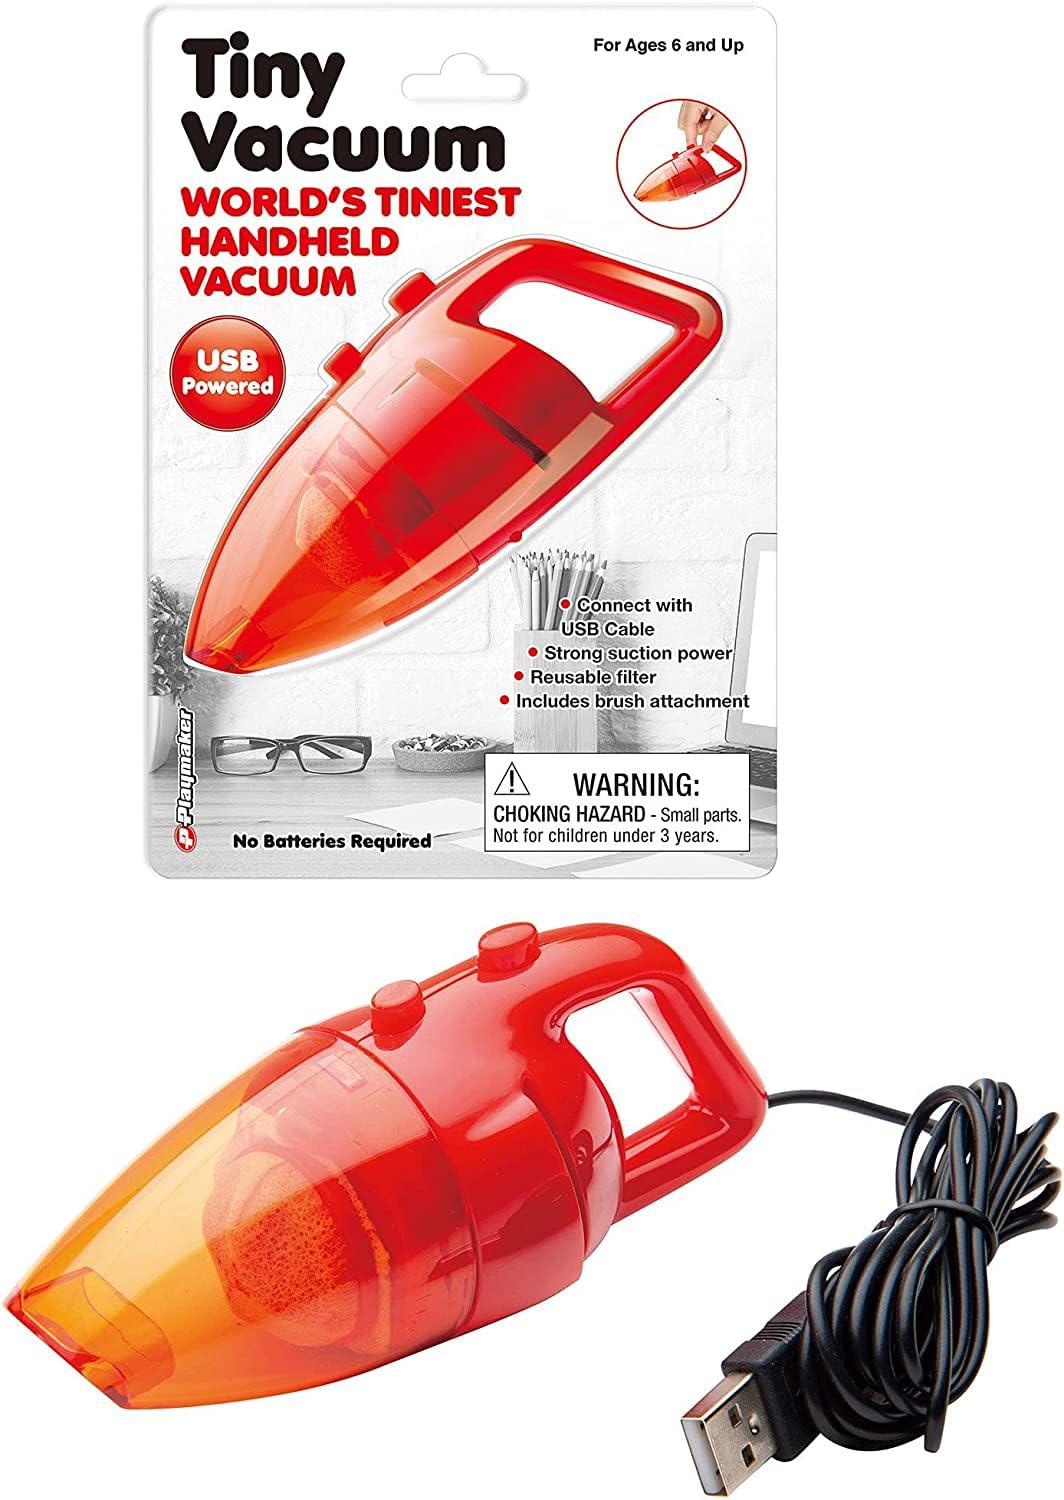 playmaker toys playmaker tiny vacuum - world's tiniest handheld vacuum - usb powered real working mini vacuum - great office 